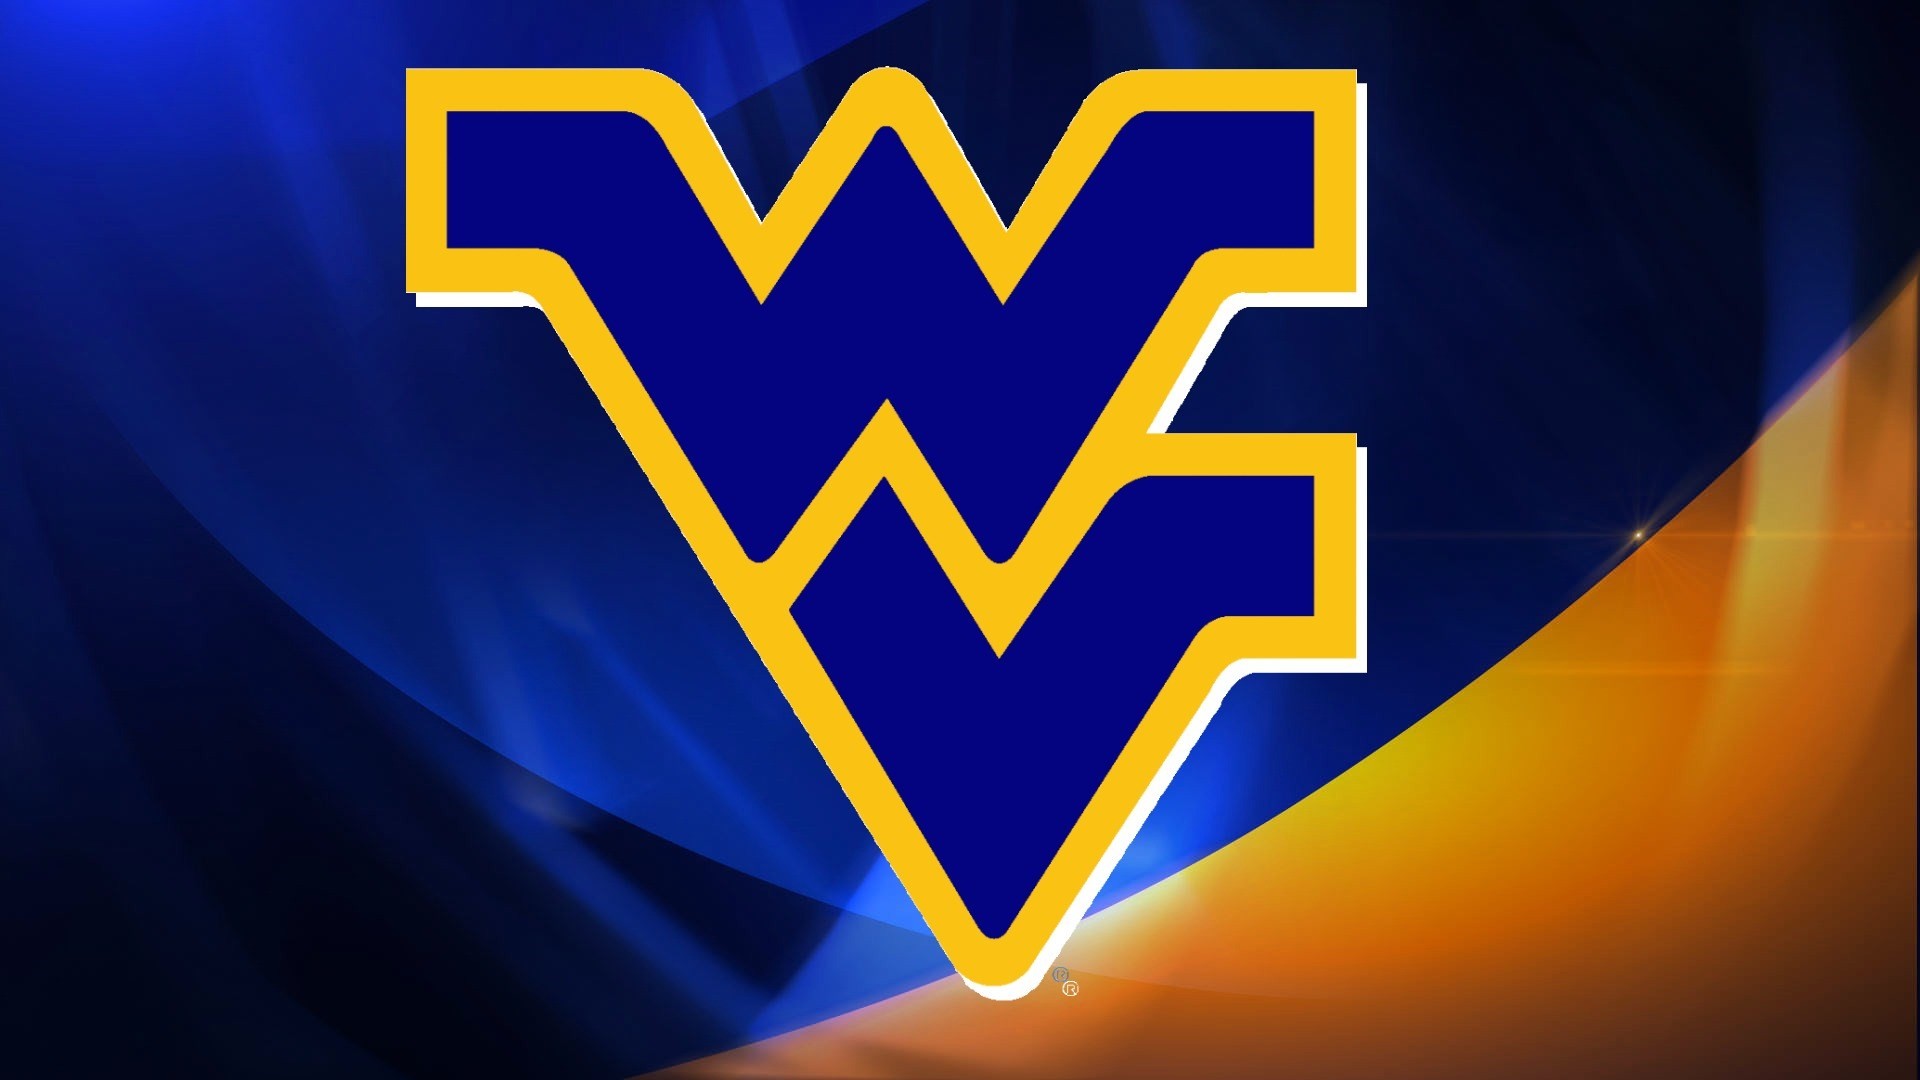 Mountaineers Basketball | All Basketball Scores Info1920 x 1080